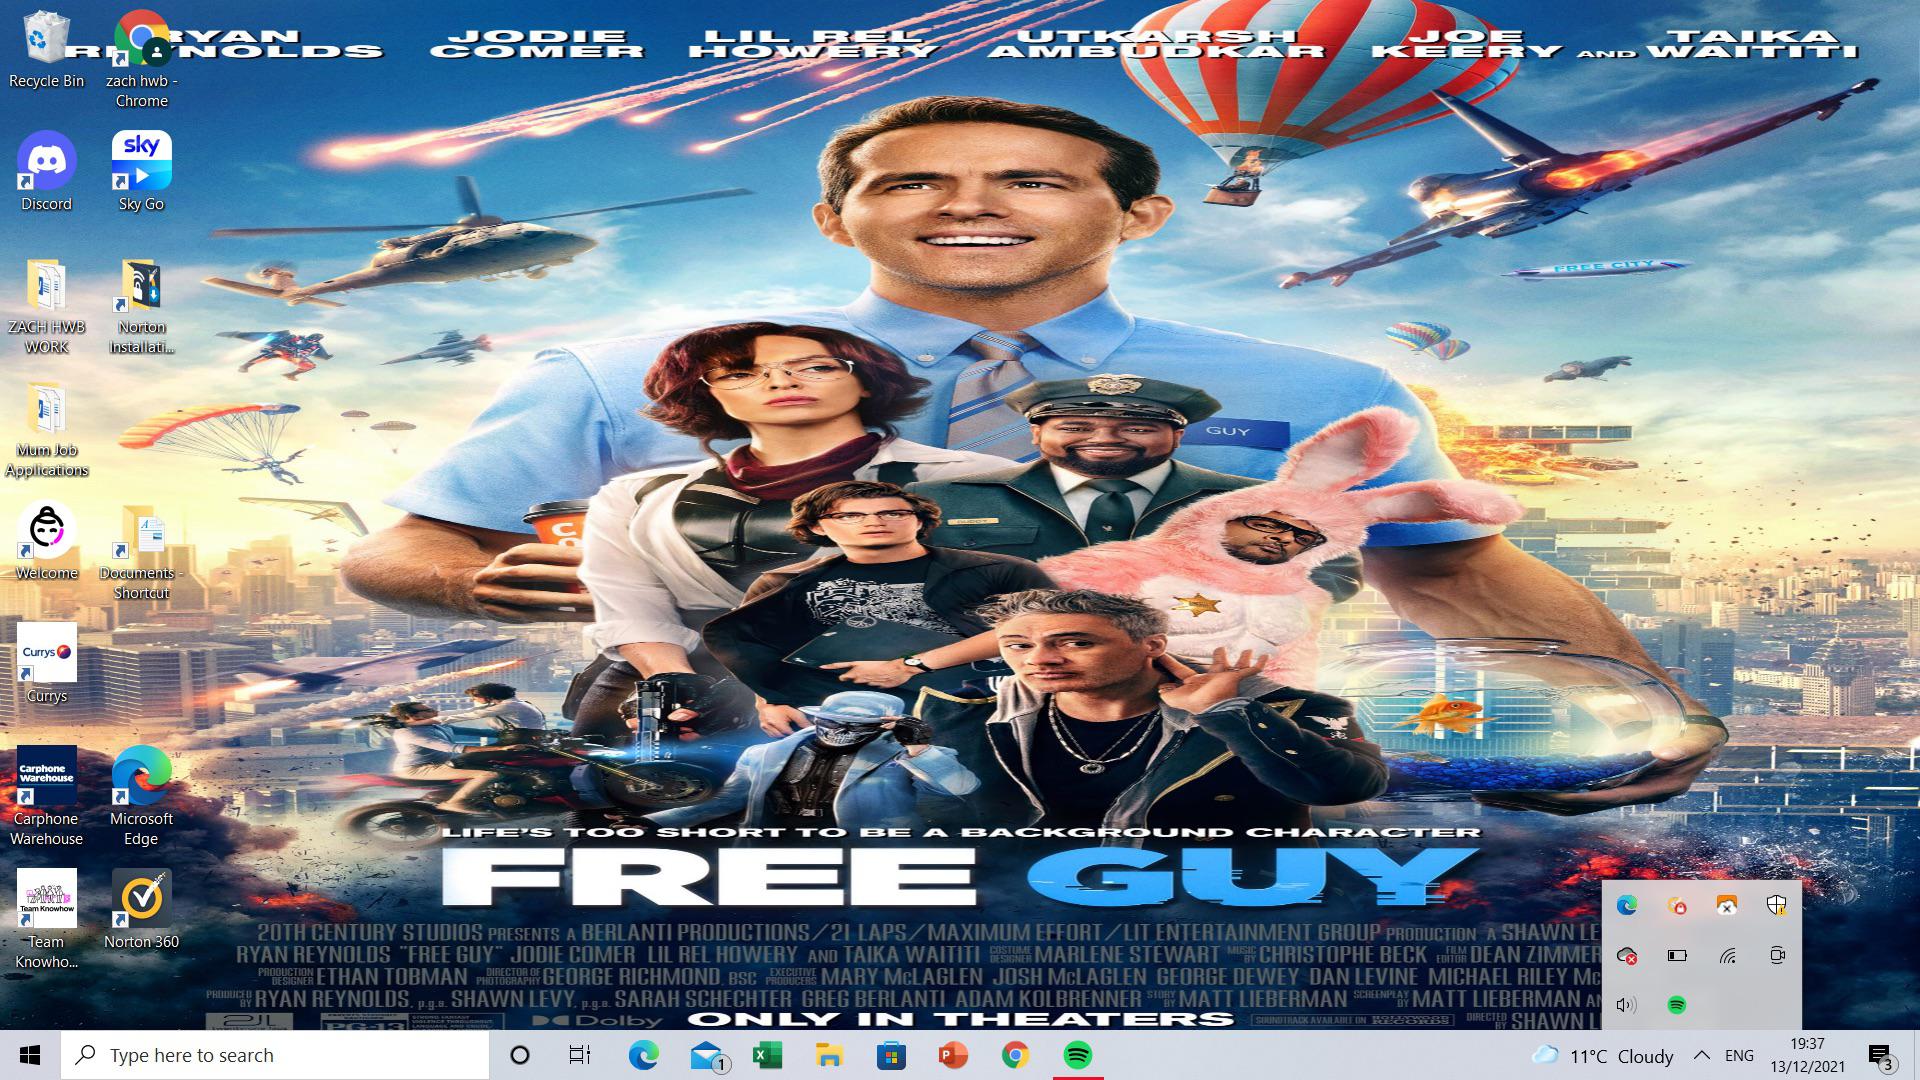 Hd Poster Of Free Guy Movie Wallpapers